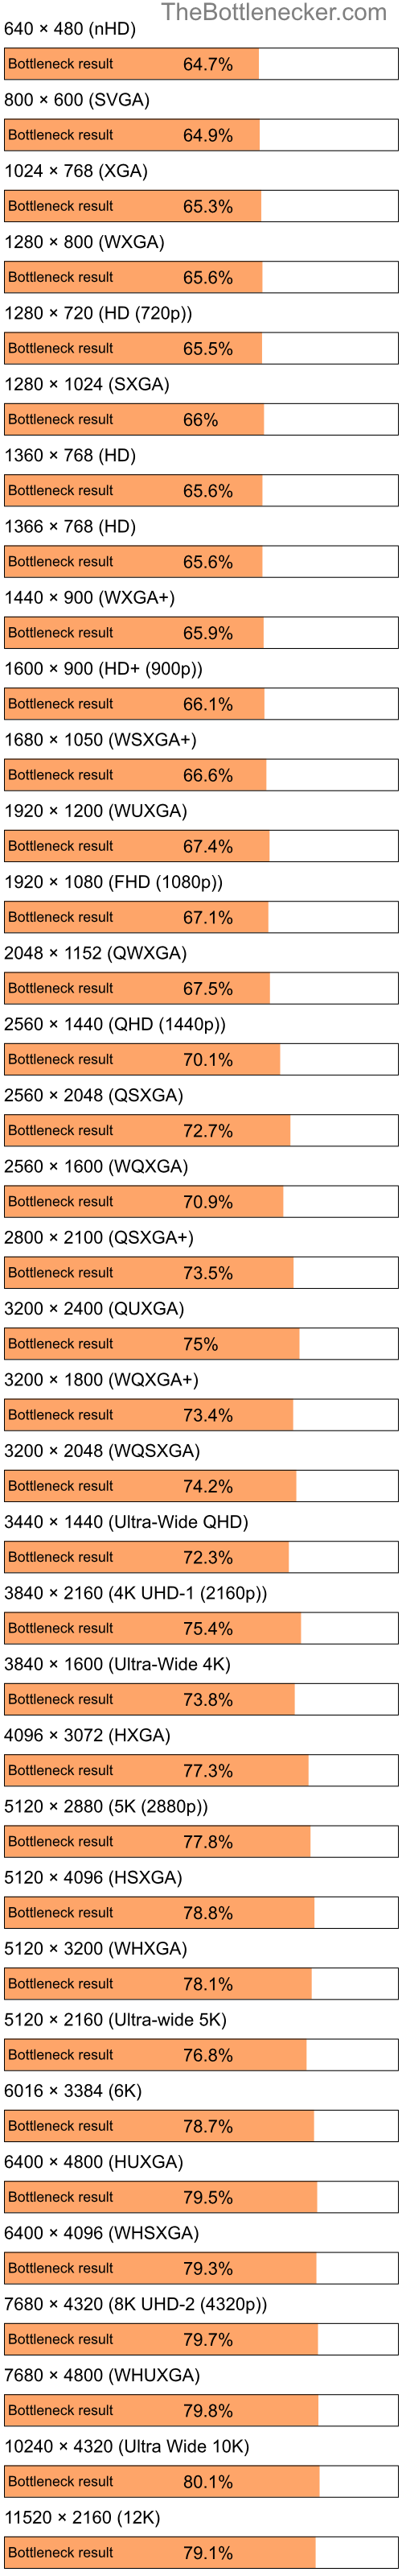 Bottleneck results by resolution for Intel Atom N270 and AMD Mobility Radeon HD 4250 in7 Days to Die